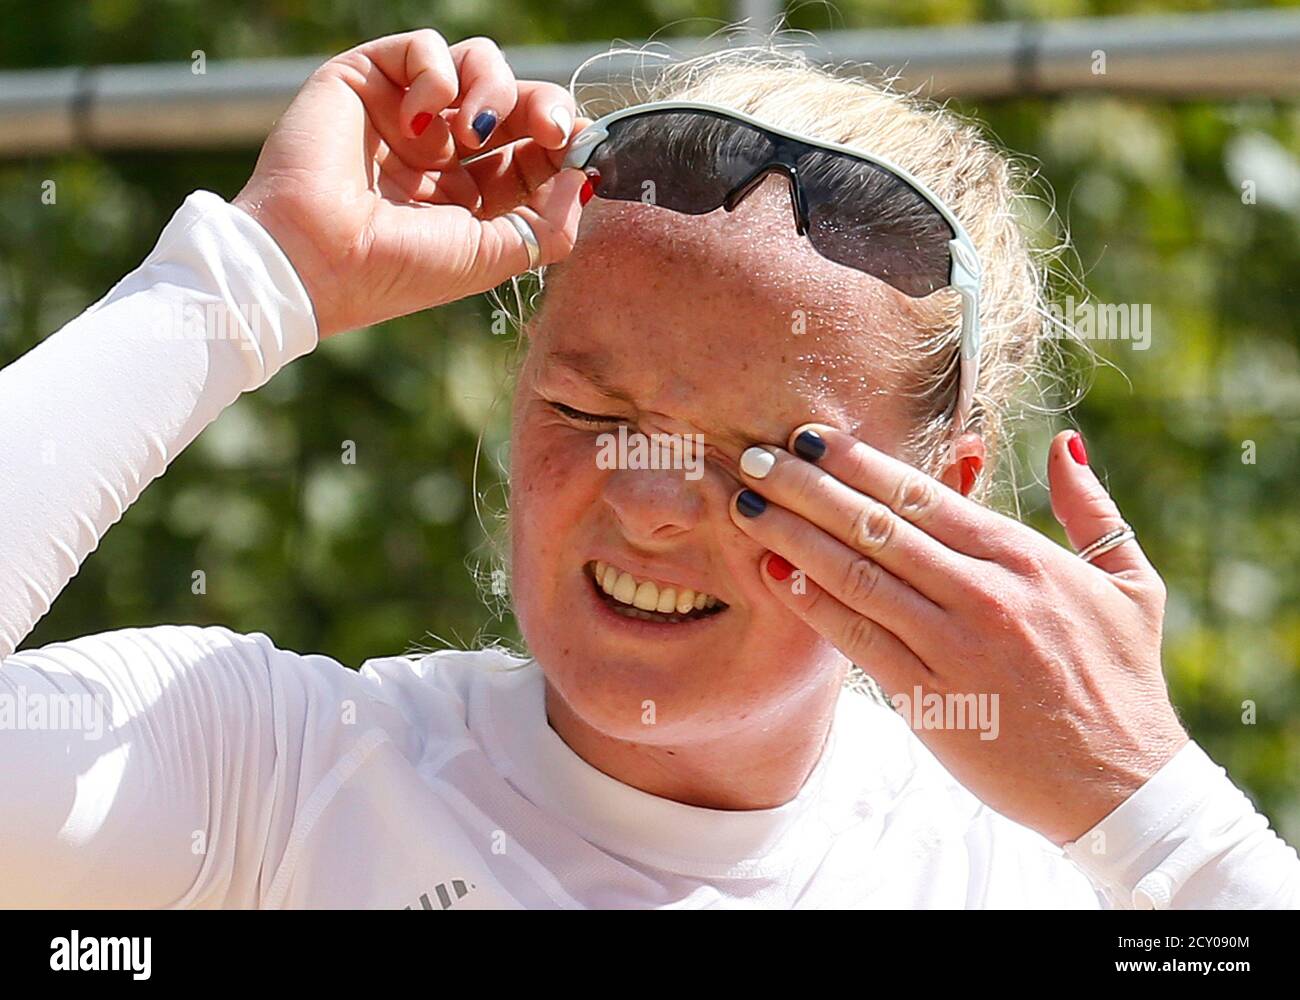 Britain's women's beach volleyball player Shauna Mullin wipes her eye as she trains at the London 2012 Olympics beach volleyball venue in central London July 19, 2012. REUTERS/Suzanne Plunkett (BRITAIN - Tags: SPORT OLYMPICS SOCIETY VOLLEYBALL) Stock Photo